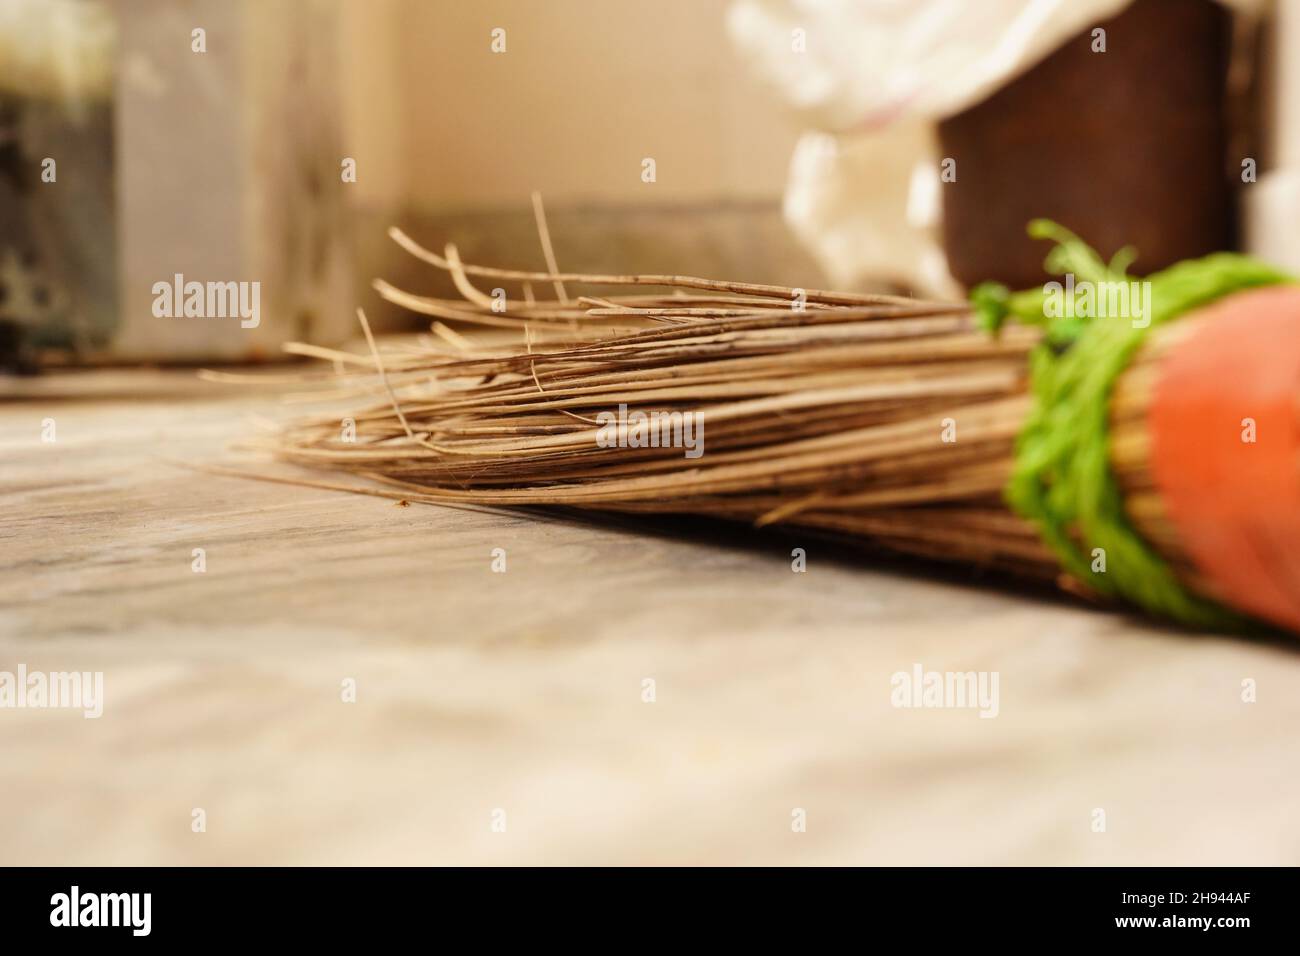 broom image in house for home cleaning Stock Photo